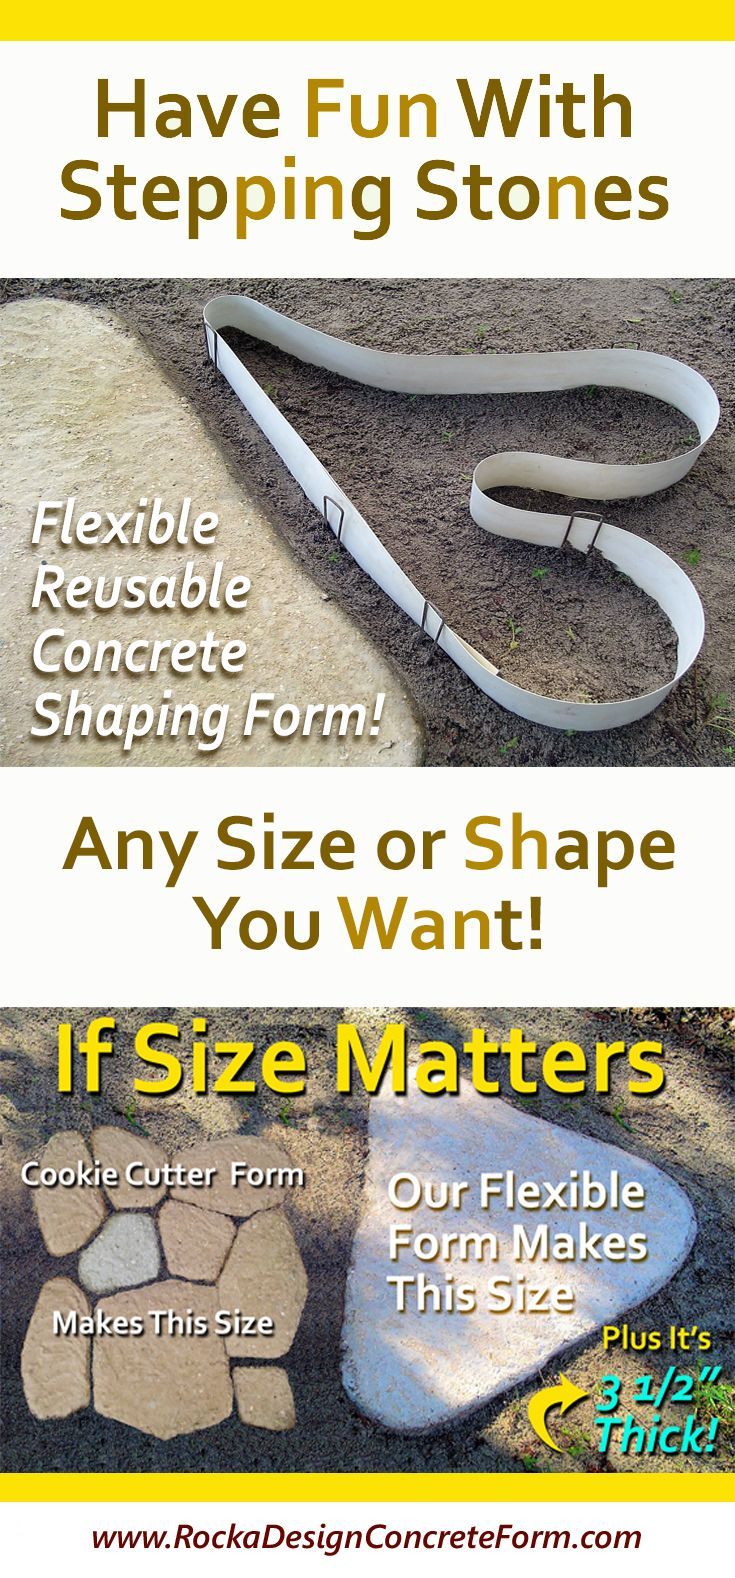 Have Fun Creating Stepping Stones Any Size or Shape You Want! Easy As 1-2-3. No Mixing of Concrete! Rocka Designв„ў is the only Stepping Stone Maker that is an 8 ft. flexible reusable form that let's you create your own custom designed stones for Garden Paths, Walkways, Patios and more. Shape the form into your desired design, add in dry fast setting concrete, add water & color, if desired, and you're done. Time for the next stone! #Stepping-Stone-Mold -   24 garden steps fun
 ideas